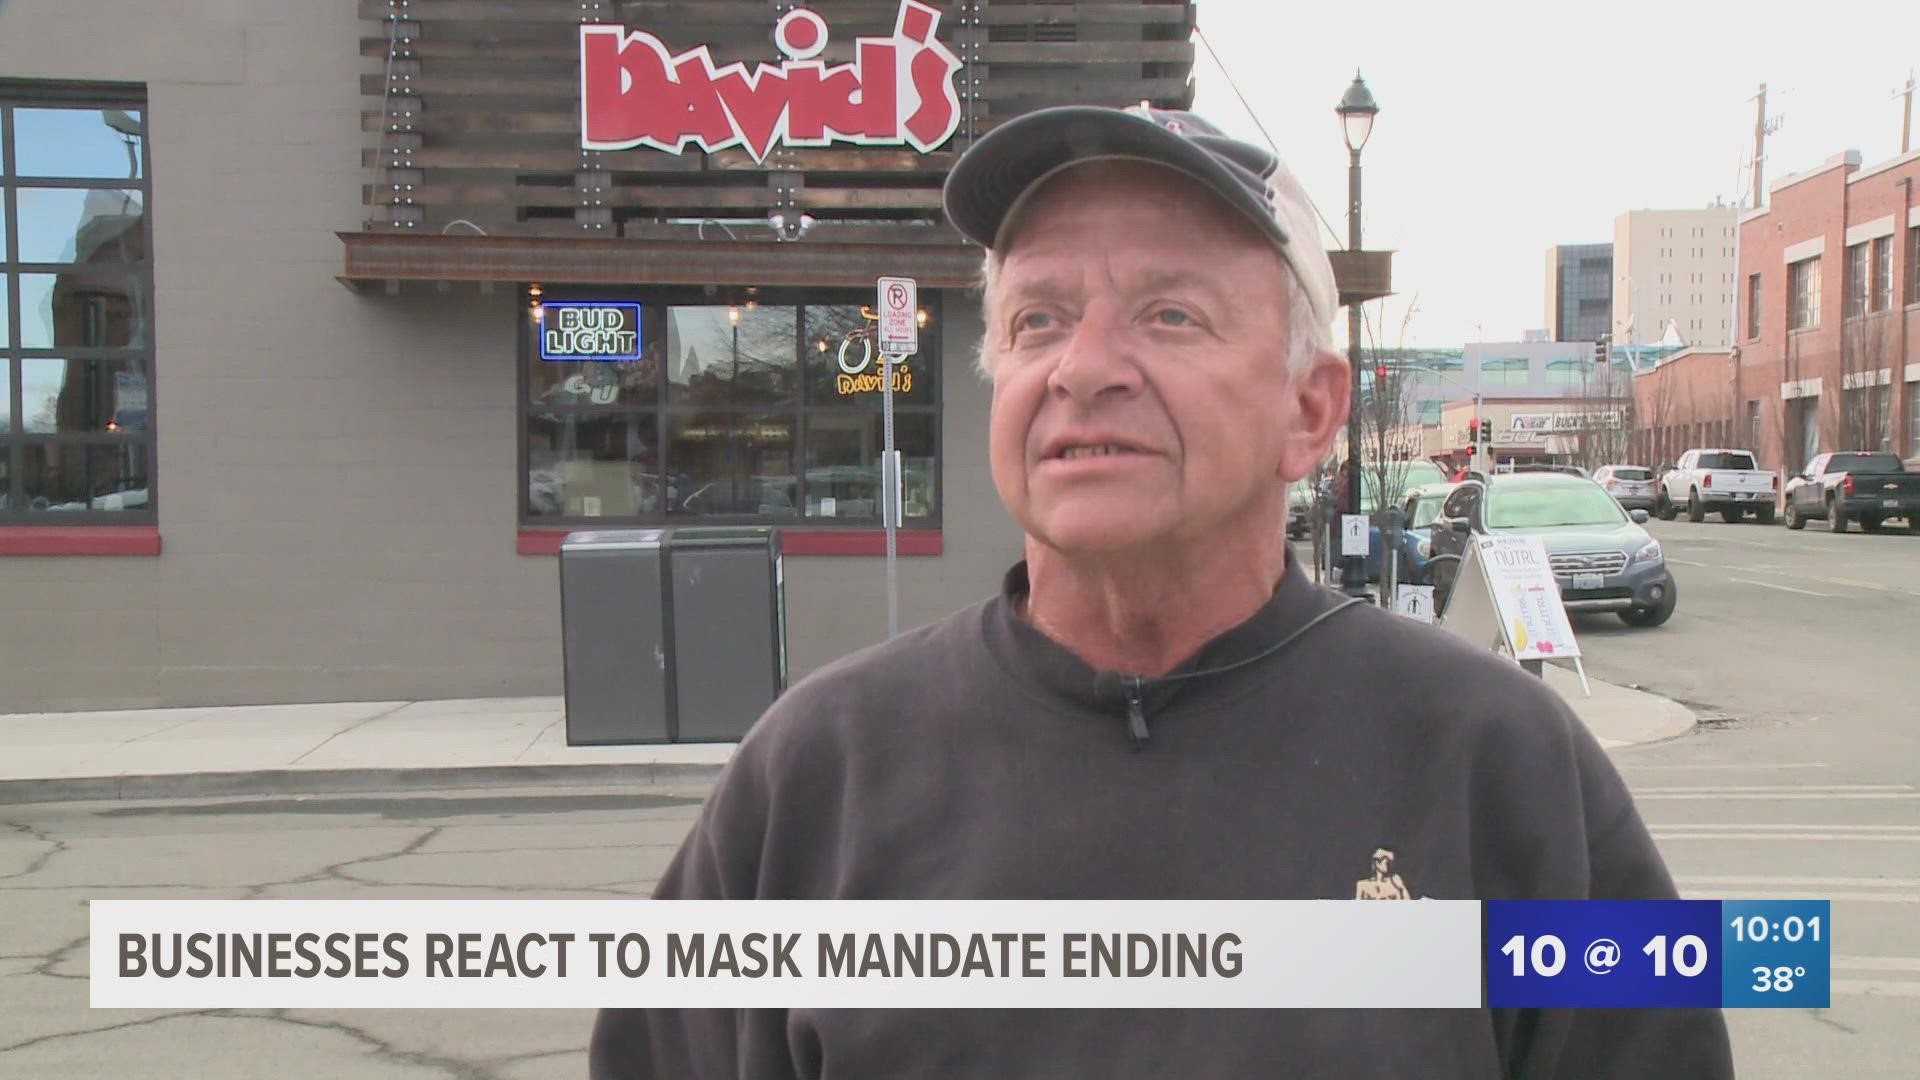 KREM 2's Kyle Simchuk met with local business owners who had mixed reactions to Inslee's mask mandate ending on March 21.